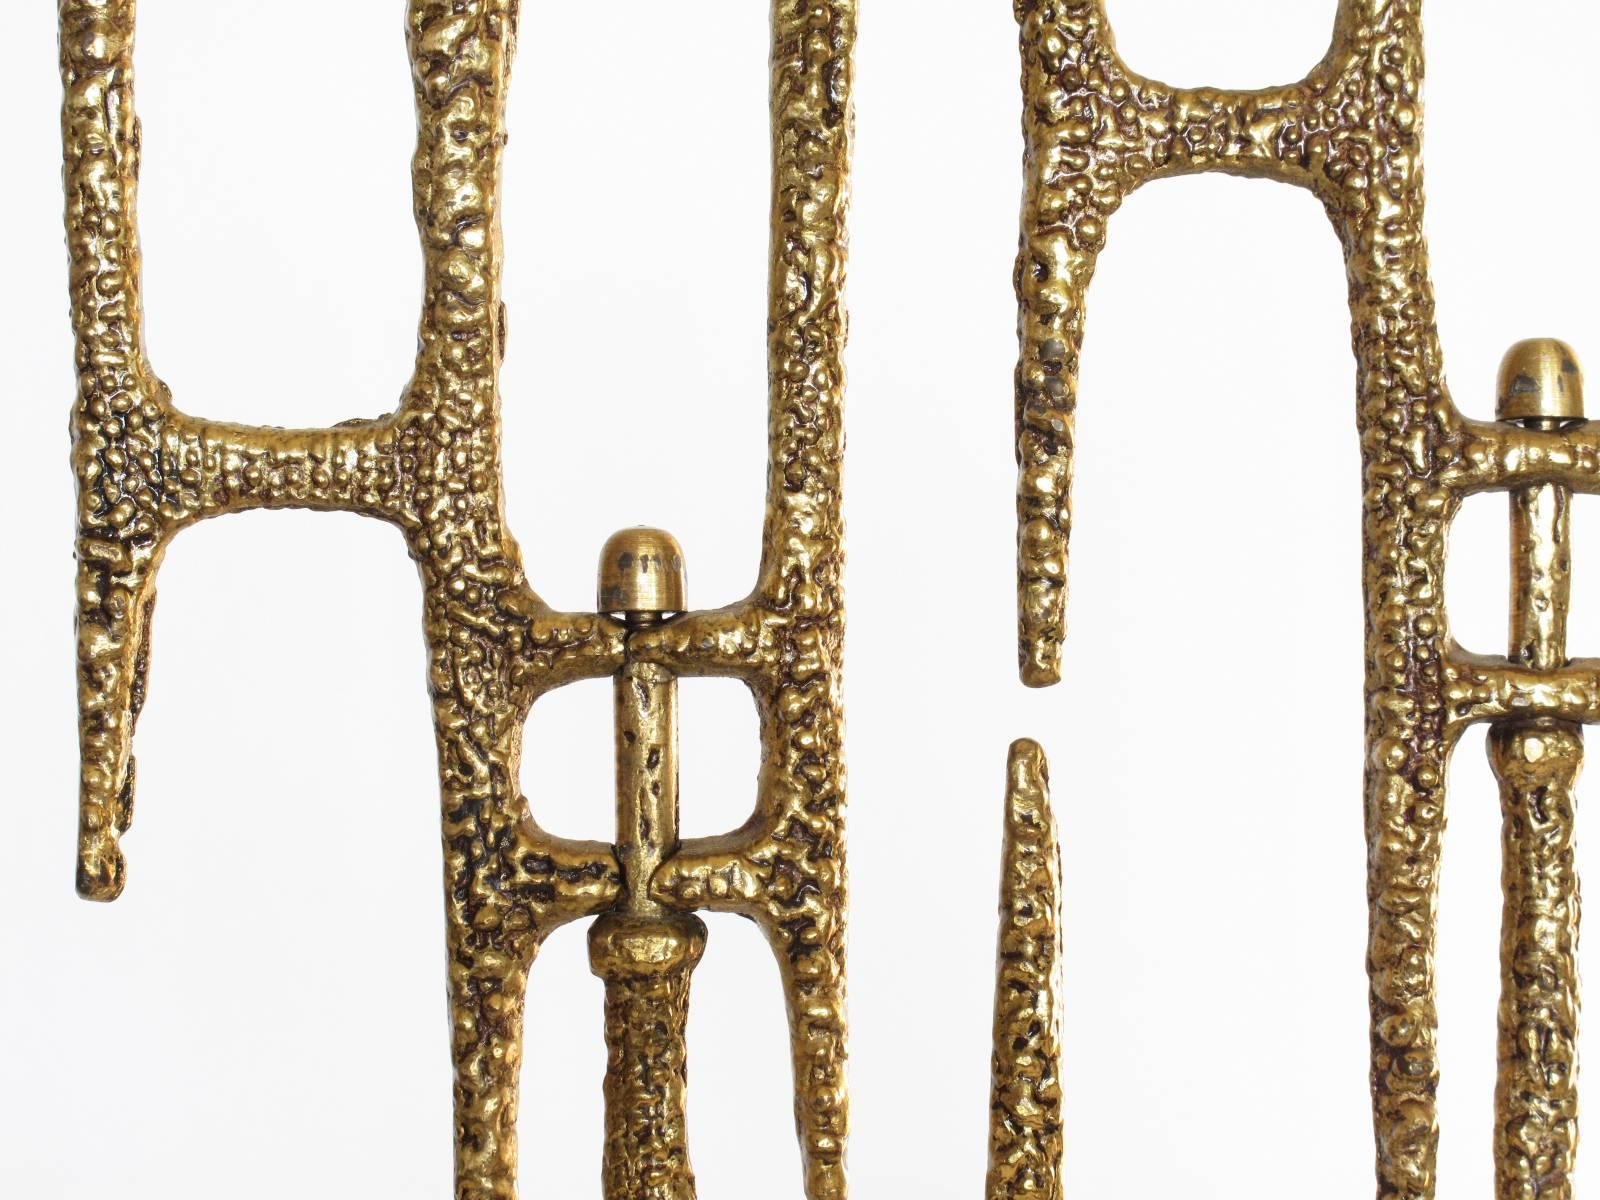 This Israeli Brutalist Modern menorah handcrafted in brass features a lovely beaded texture along the surface and nine candleholders which rotate along the articulating stems, designed and made by Wainberg, Israel, 1970s.

Dimensions: 13.25 high x